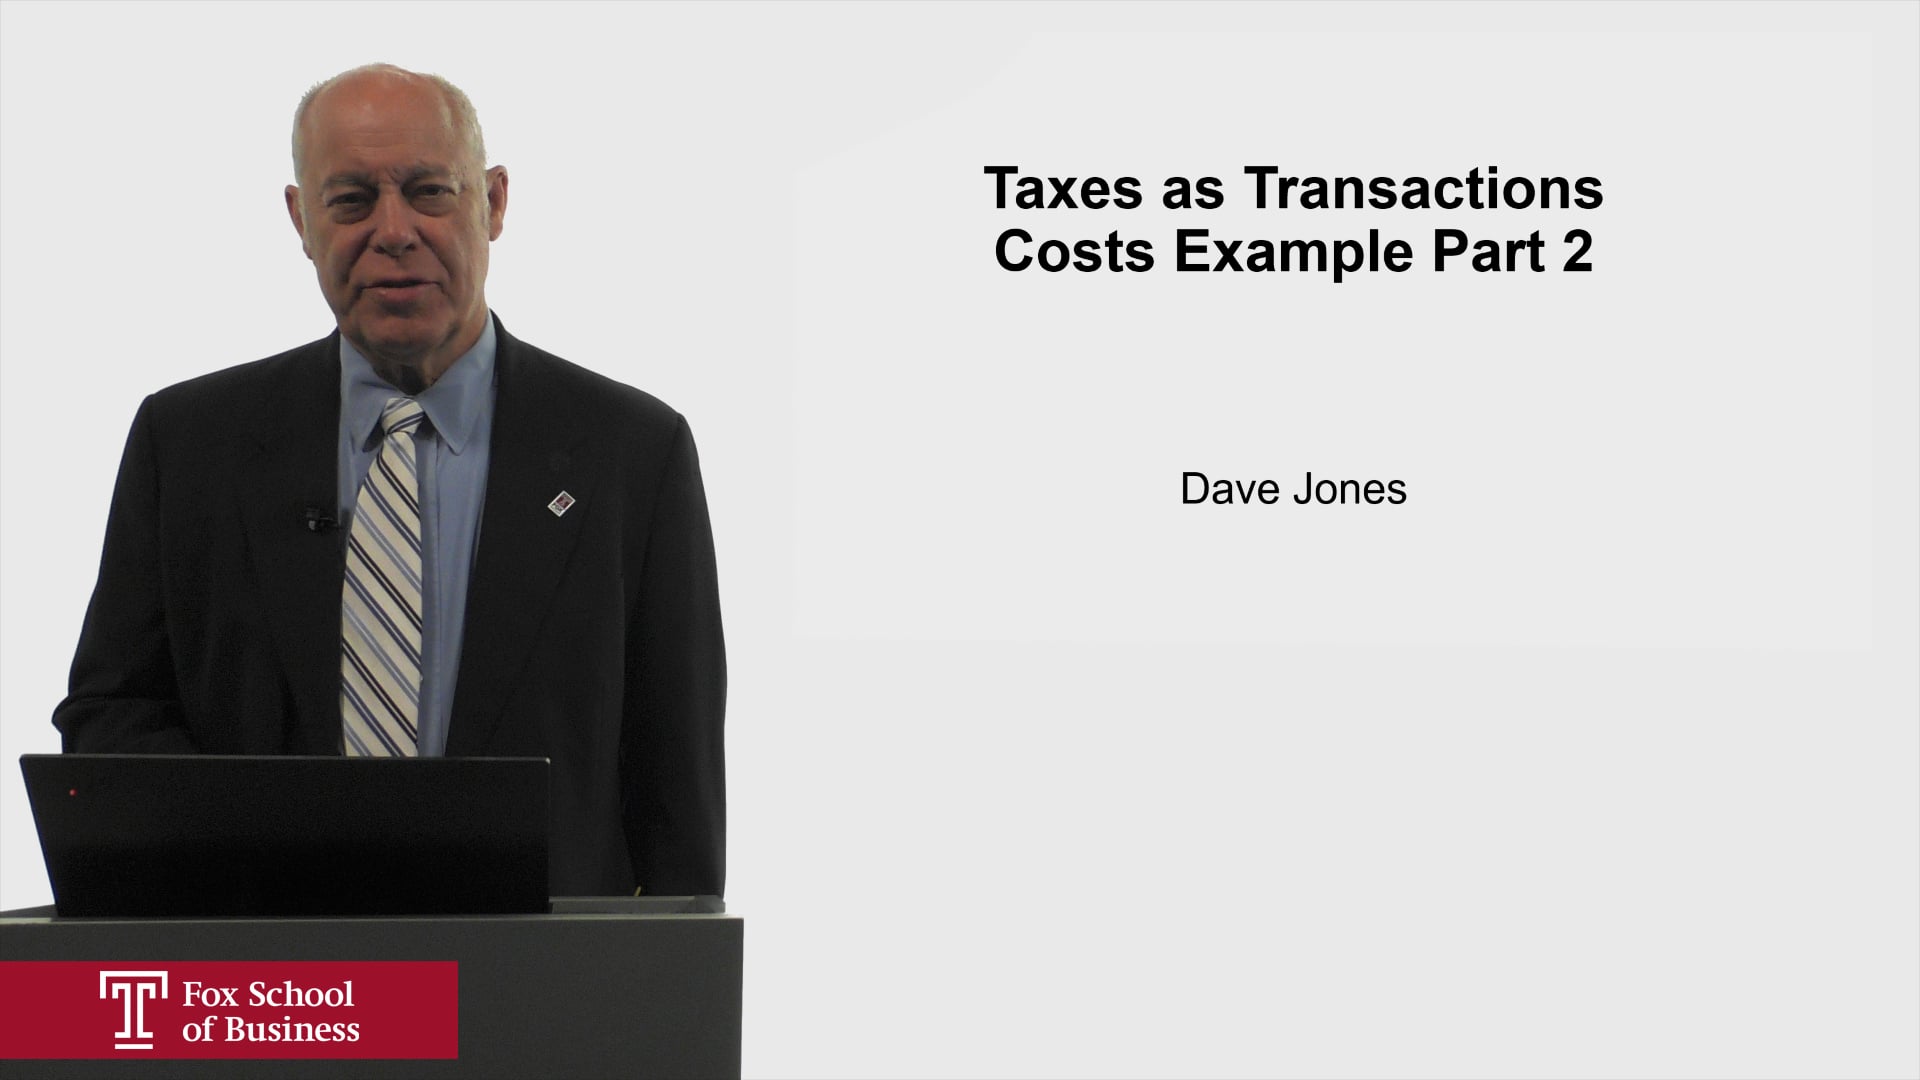 Taxes as Transactions Costs Example Part 2